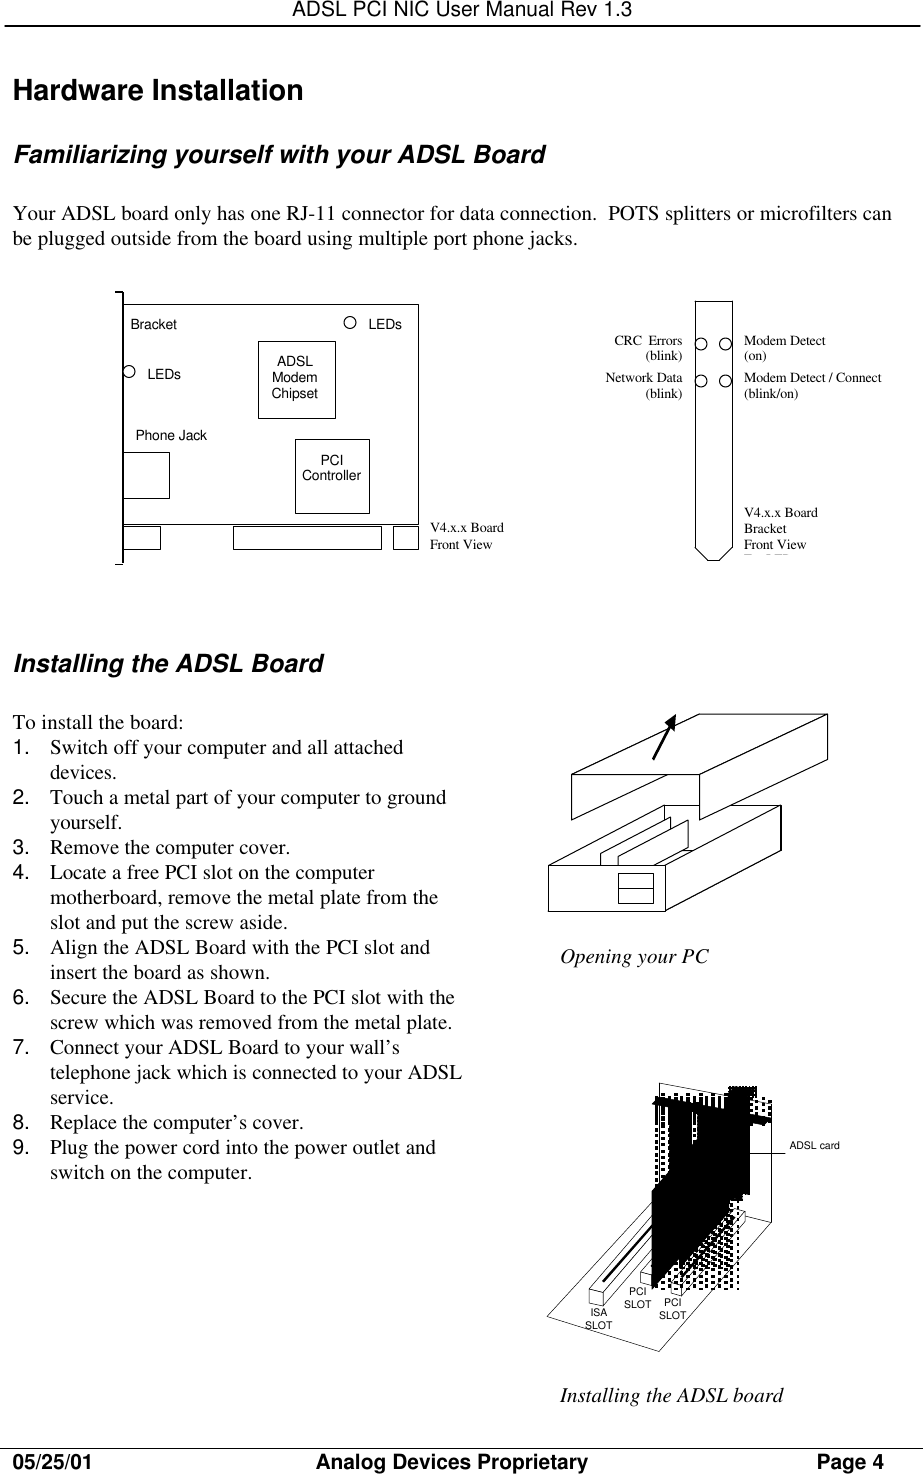 ADSL PCI NIC User Manual Rev 1.305/25/01                                     Analog Devices Proprietary                                      Page 4Hardware InstallationFamiliarizing yourself with your ADSL BoardYour ADSL board only has one RJ-11 connector for data connection.  POTS splitters or microfilters canbe plugged outside from the board using multiple port phone jacks.Modem Detect(on)Modem Detect / Connect(blink/on)CRC  Errors(blink)Network Data(blink)V4.x.x BoardBracketFront ViewFor LEDsInstalling the ADSL BoardTo install the board:1. Switch off your computer and all attacheddevices.2. Touch a metal part of your computer to groundyourself.3. Remove the computer cover.4. Locate a free PCI slot on the computermotherboard, remove the metal plate from theslot and put the screw aside.5. Align the ADSL Board with the PCI slot andinsert the board as shown.6. Secure the ADSL Board to the PCI slot with thescrew which was removed from the metal plate.7. Connect your ADSL Board to your wall’stelephone jack which is connected to your ADSLservice.8. Replace the computer’s cover.9. Plug the power cord into the power outlet andswitch on the computer.LEDs ADSLModemChipsetPCIControllerBracketPhone JackLEDsV4.x.x BoardFront ViewISASLOTPCISLOTPCISLOTADSL cardInstalling the ADSL boardOpening your PC